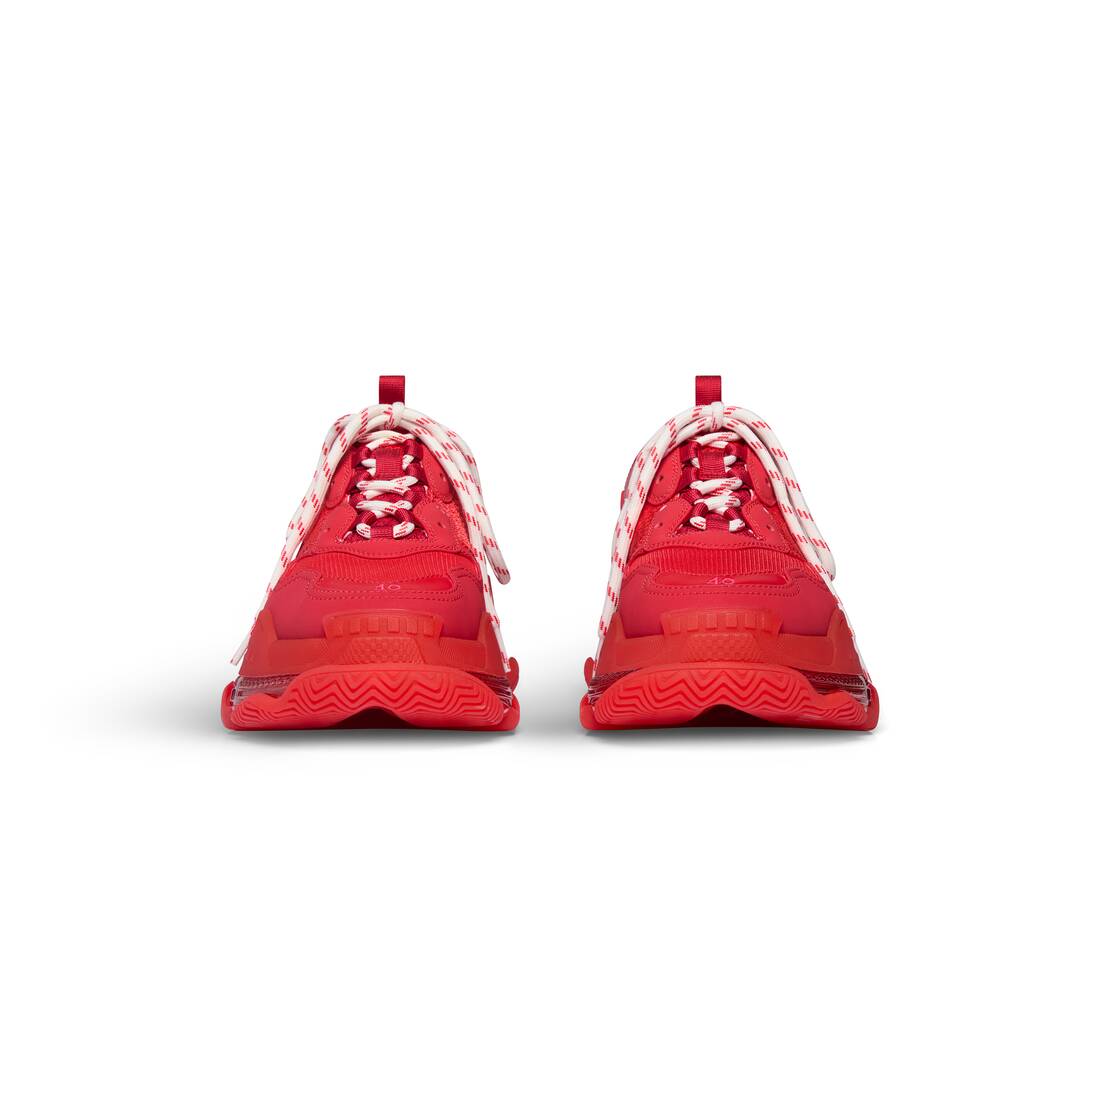 Mens Red Balenciaga Shoes  Footwear 23 Items in Stock  Stylight